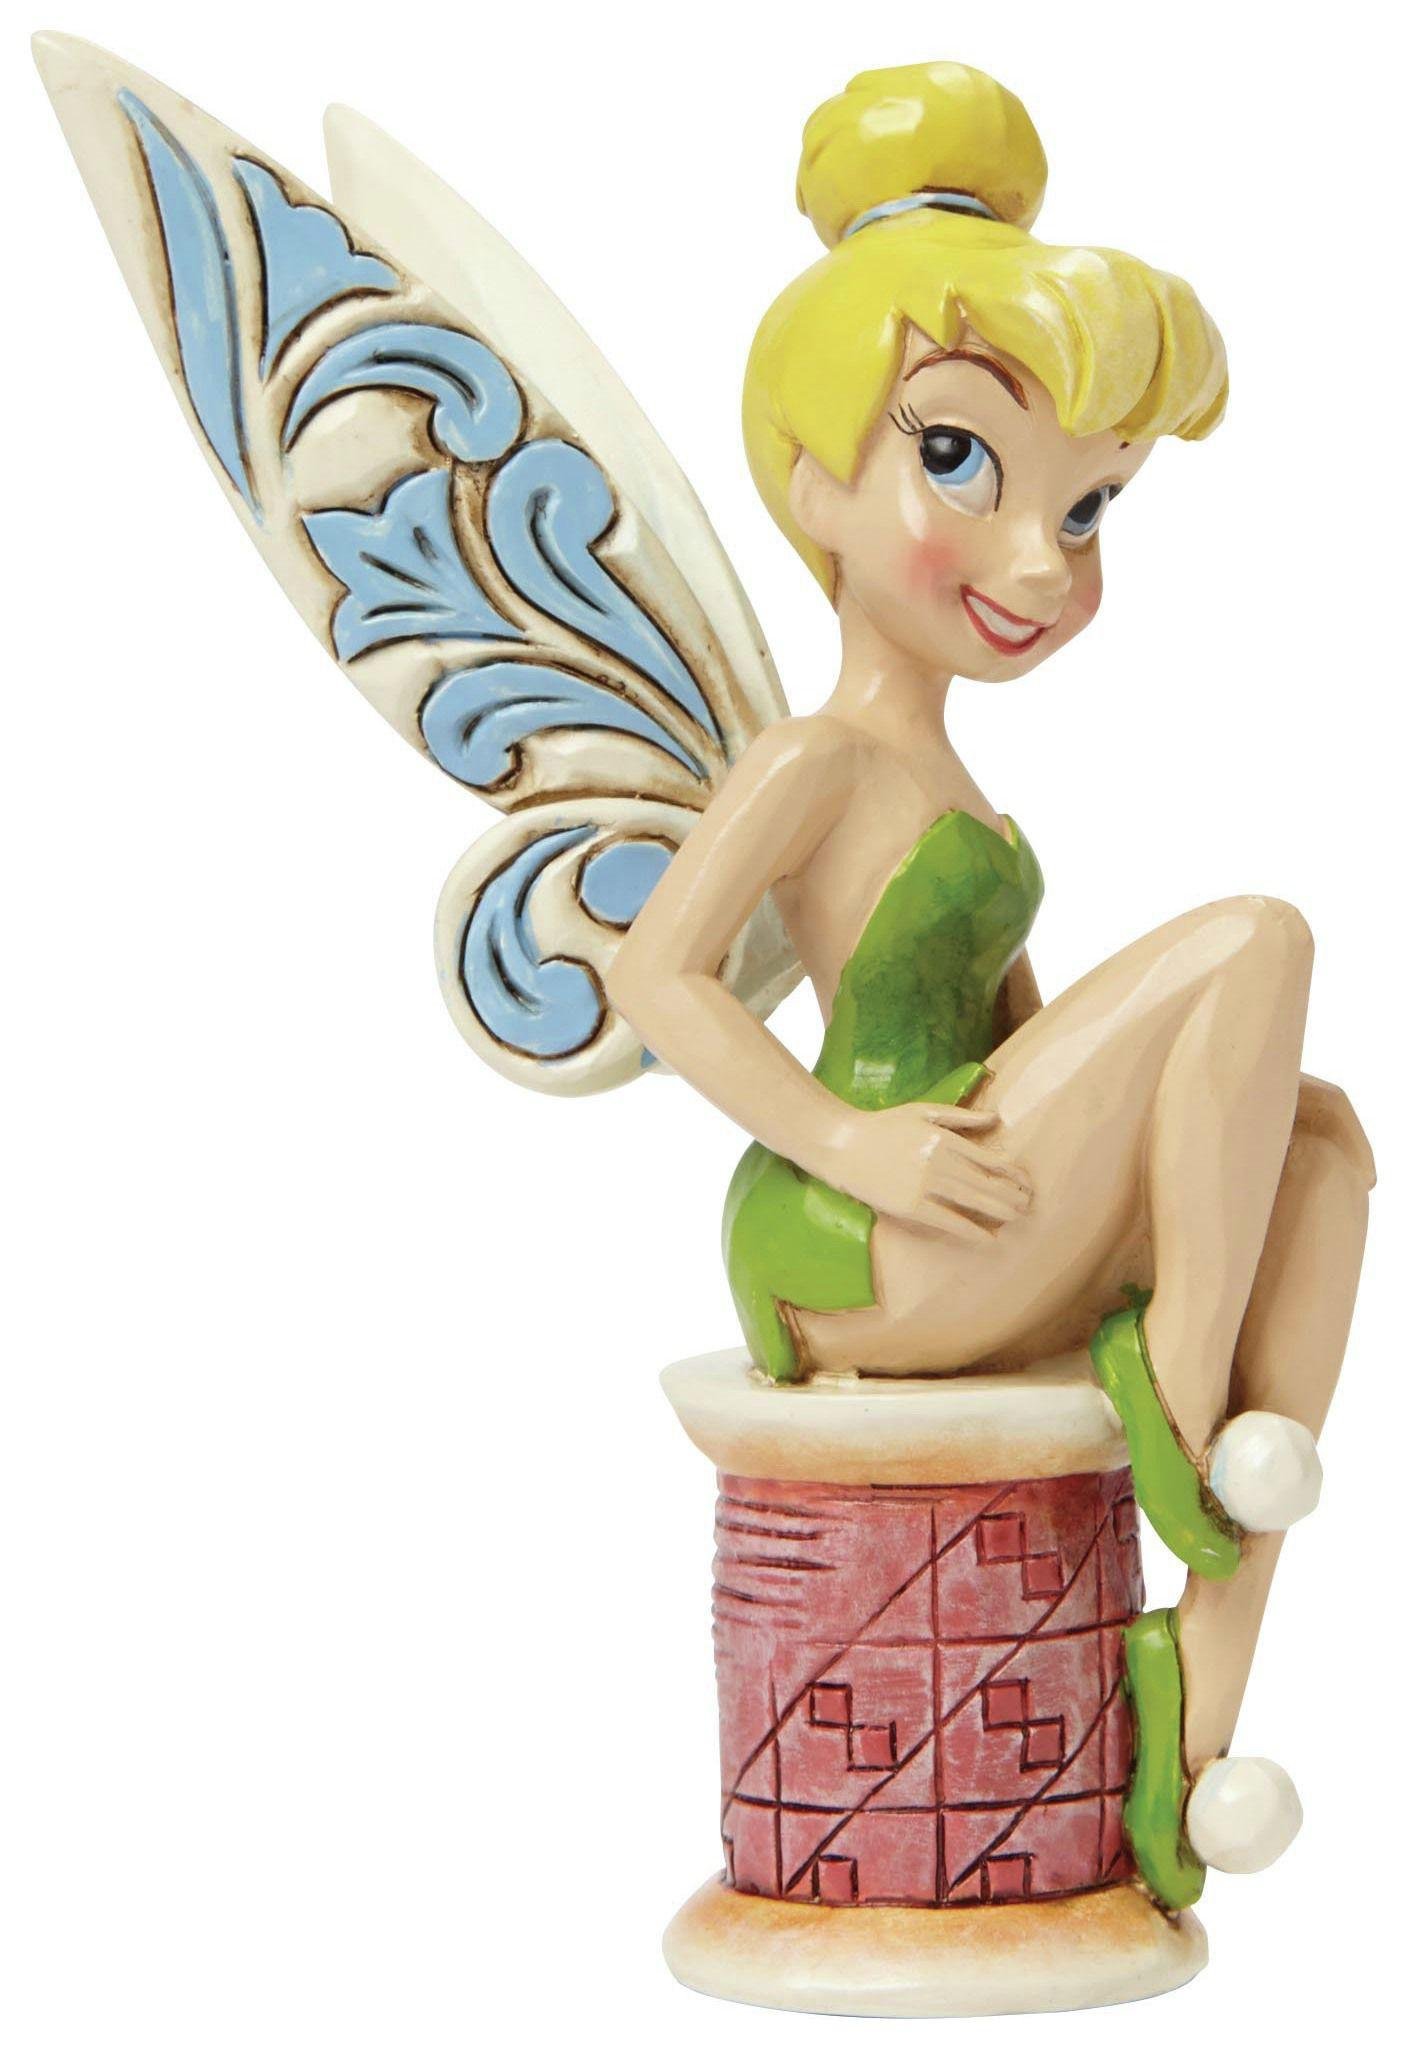 Disney Traditions Crafty Tink Tinkerbell Ornament. review